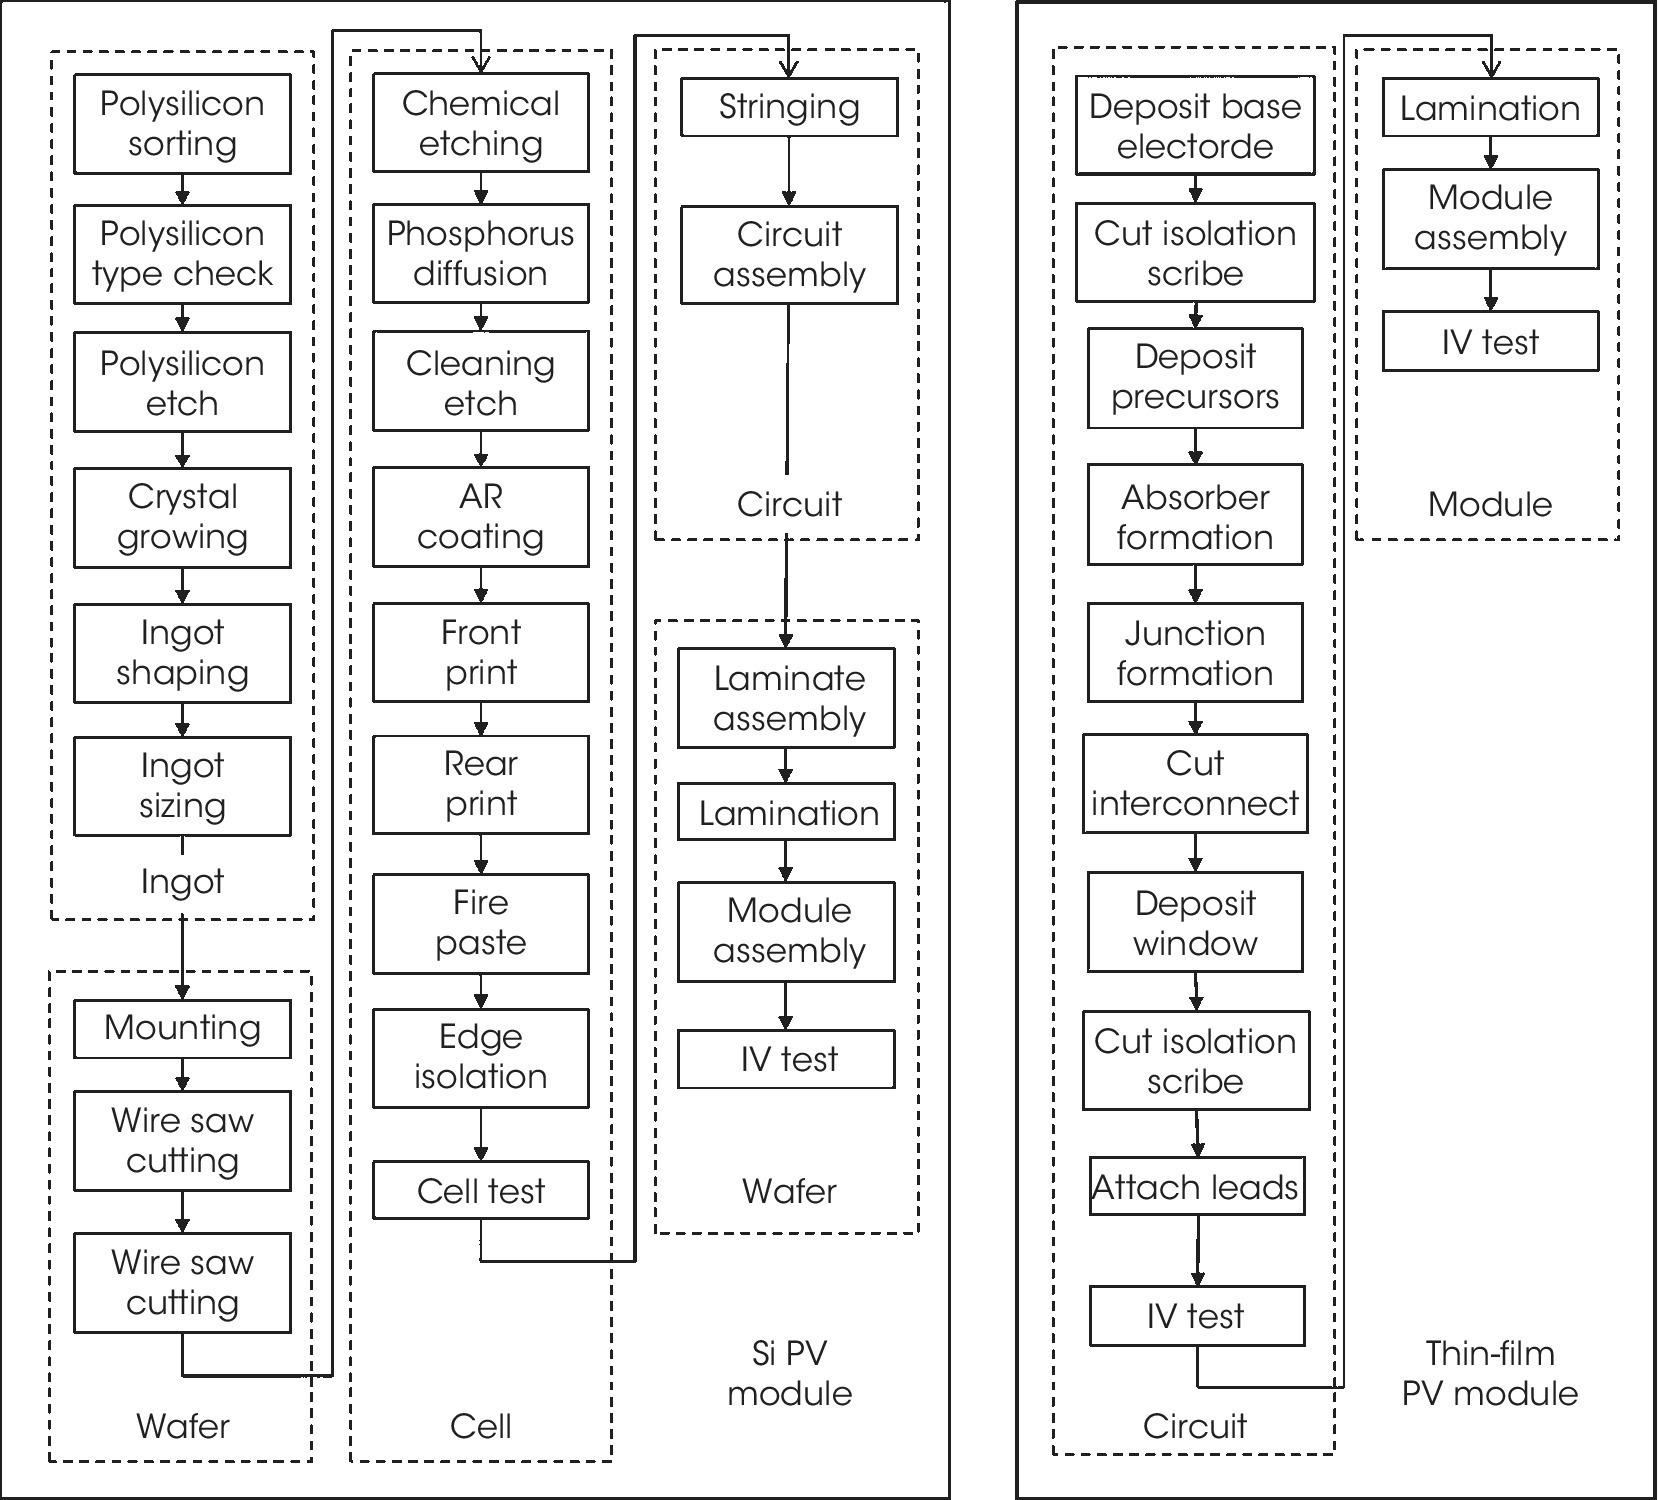 Diagram of the process sequence for manufacturing Si (left) and thin‐film PV modules (right), from polysilicon sorting to chemical etching and to IV test and from deposit base electrode to IV test, respectively.